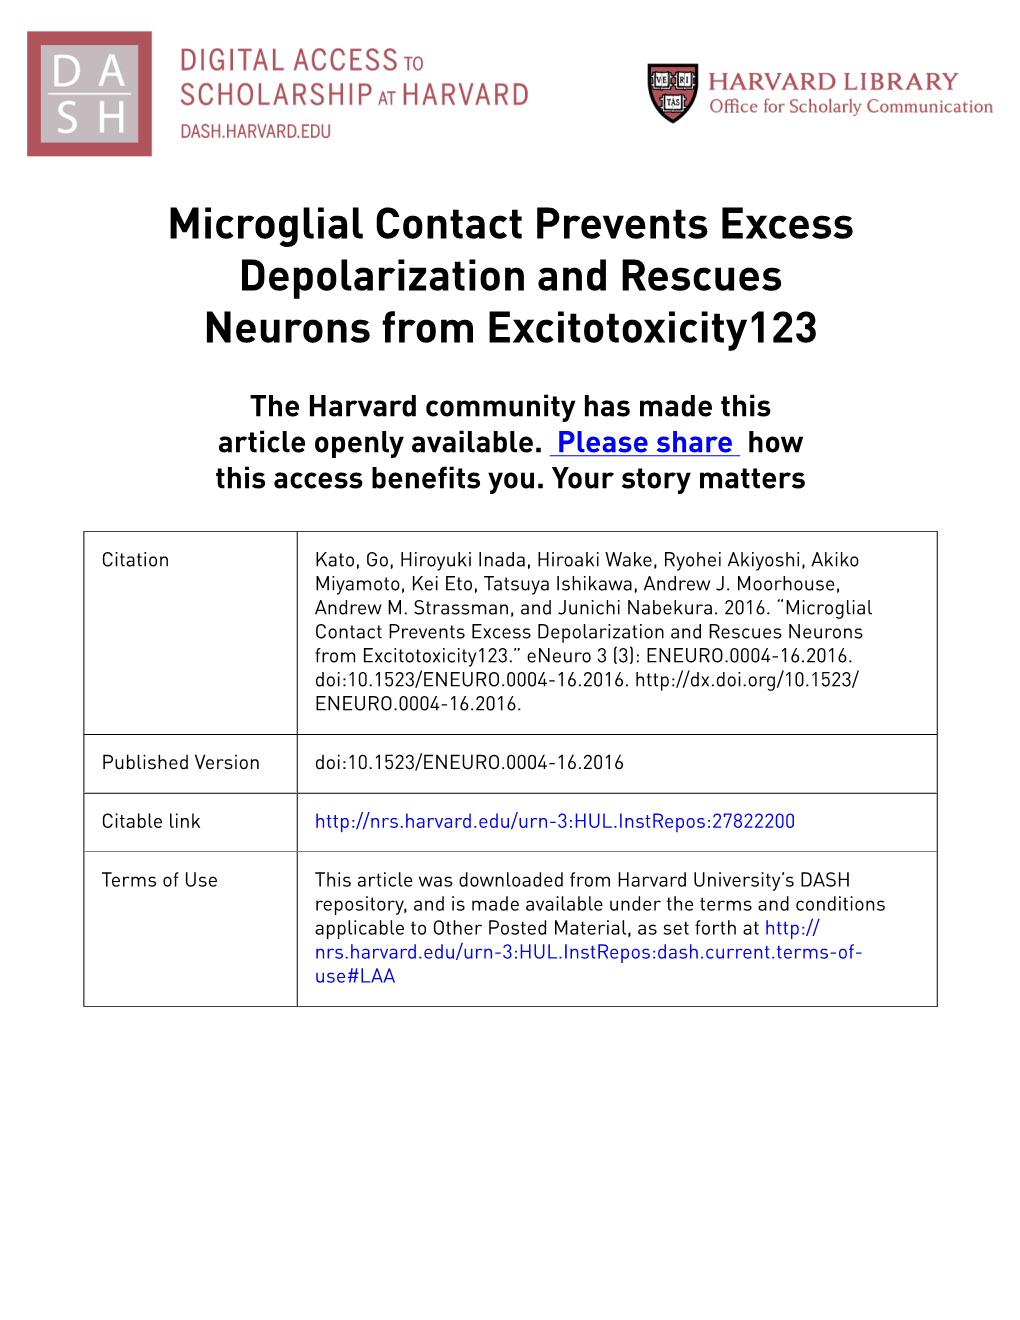 Microglial Contact Prevents Excess Depolarization and Rescues Neurons from Excitotoxicity123